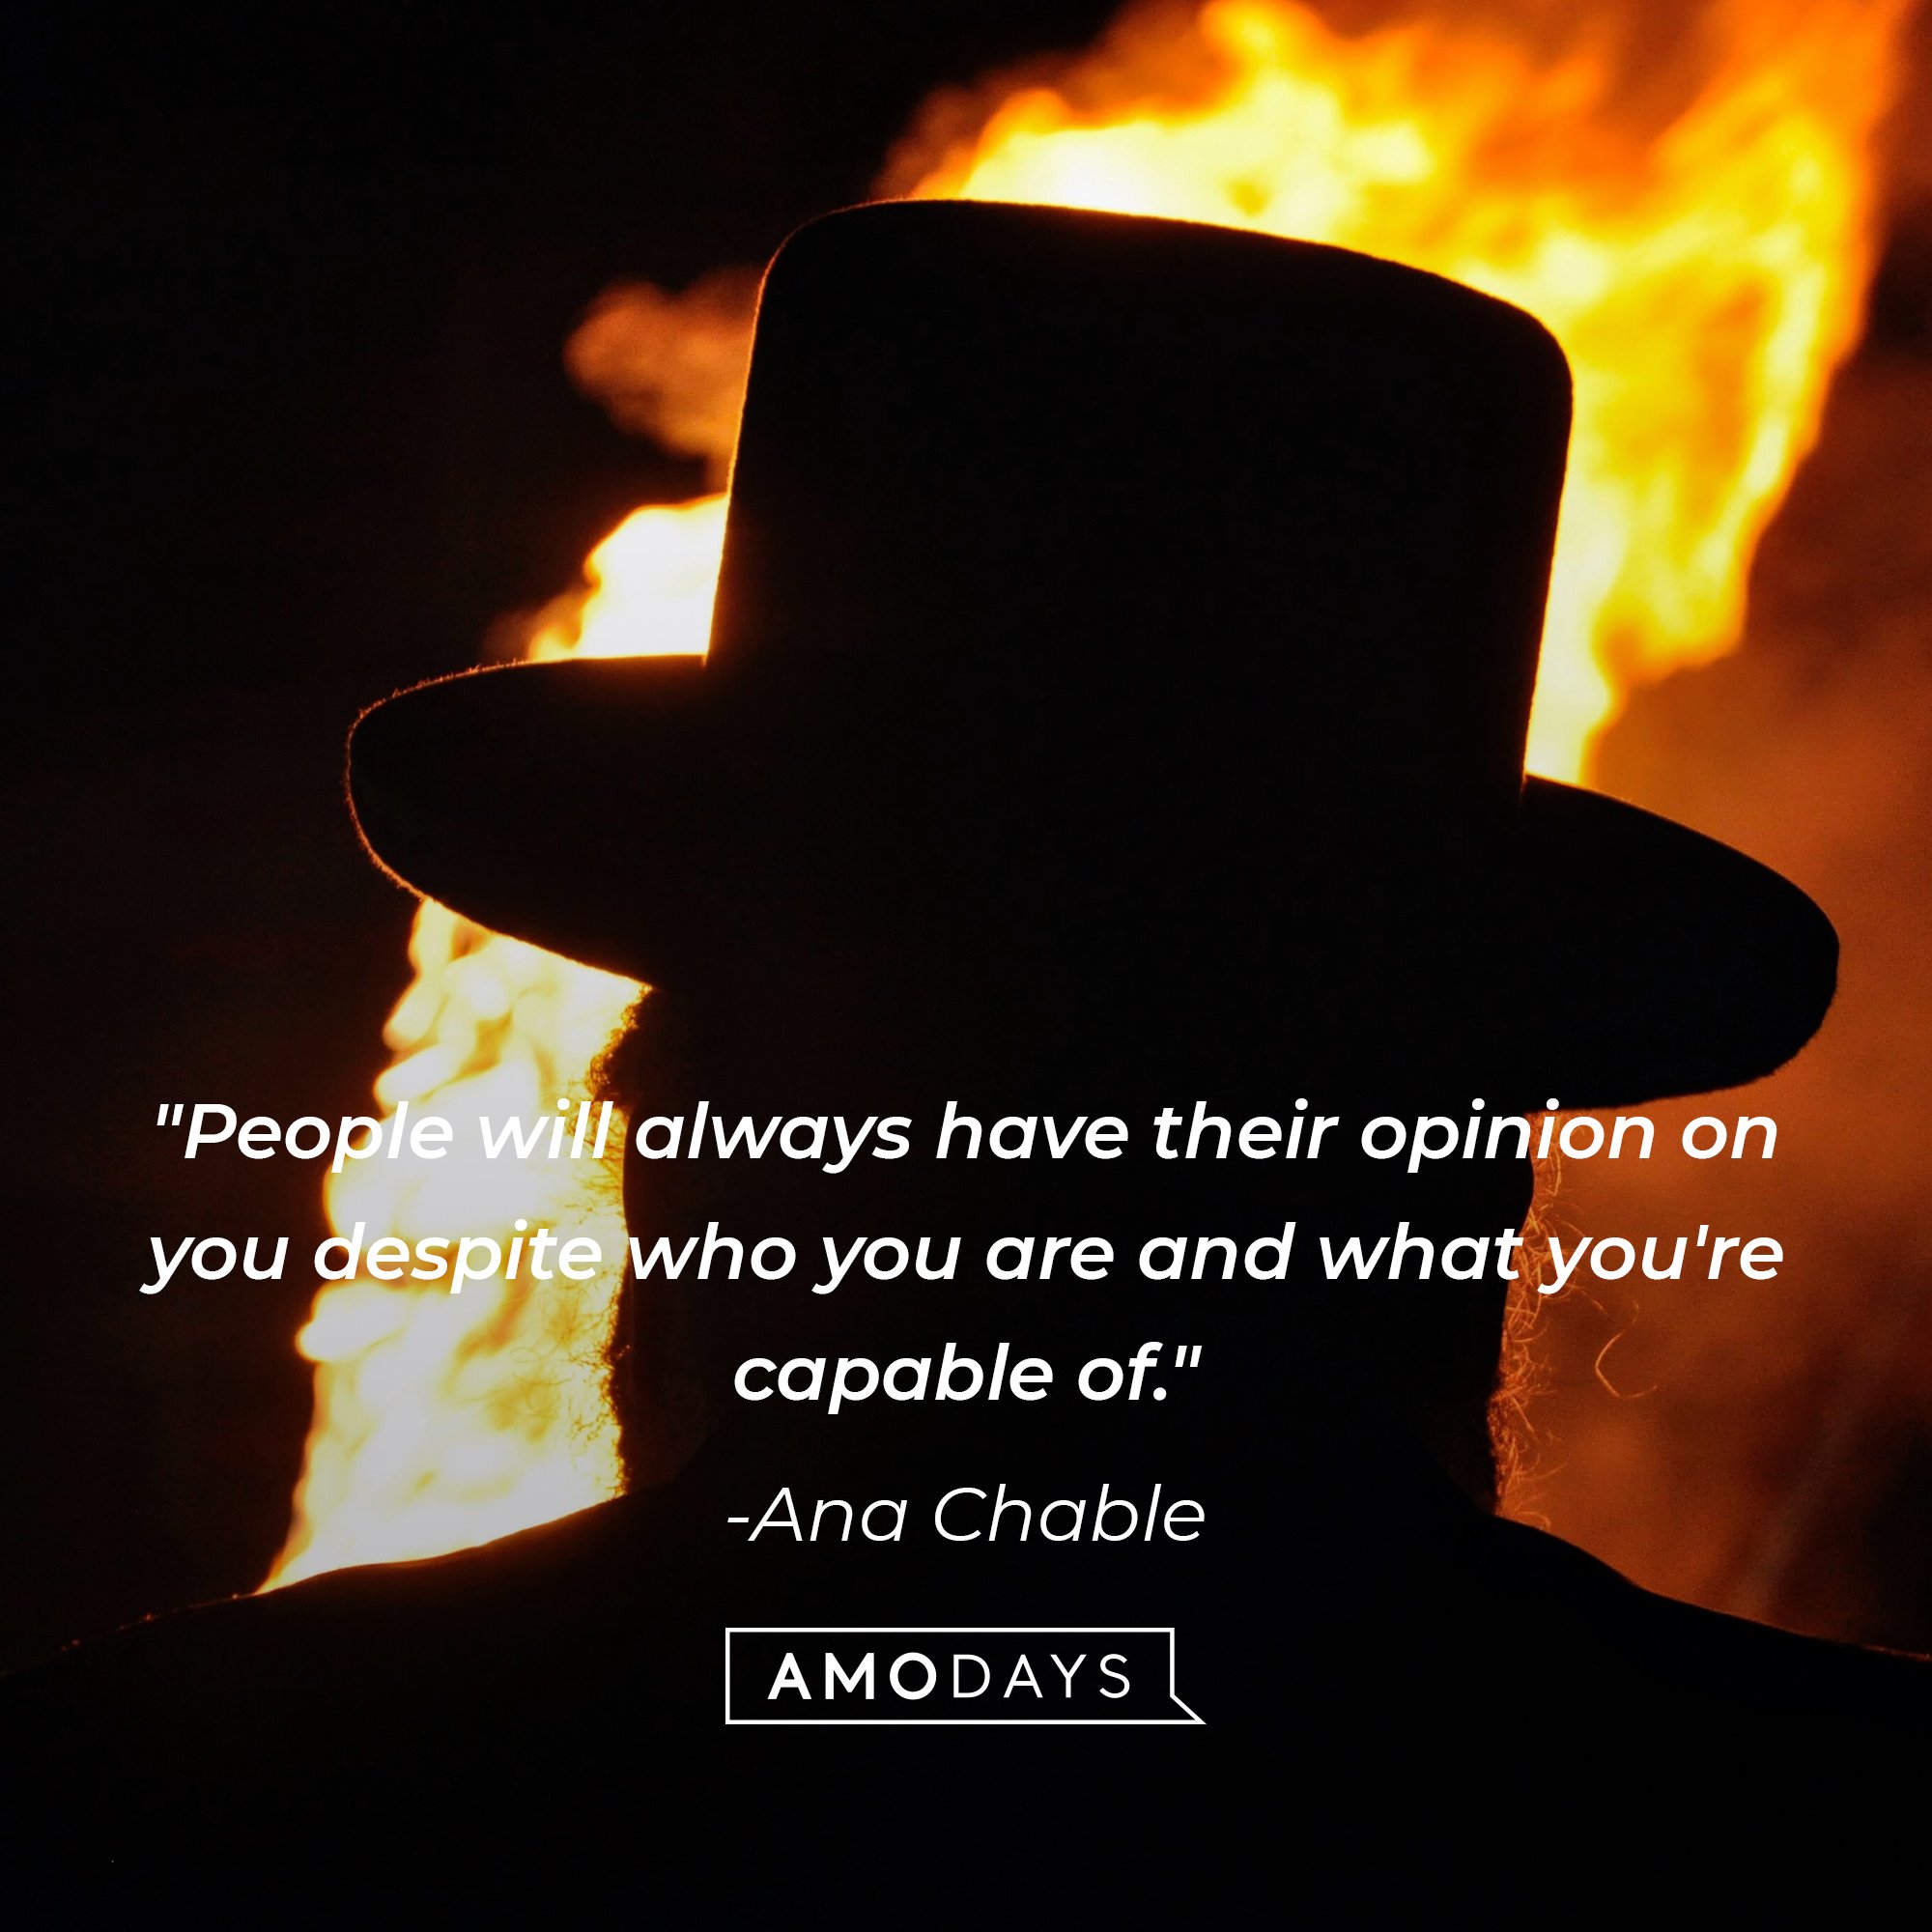 Ana Chable’s quote: "People will always have their opinion on you despite who you are and what you're capable of." | Image: Amodays  